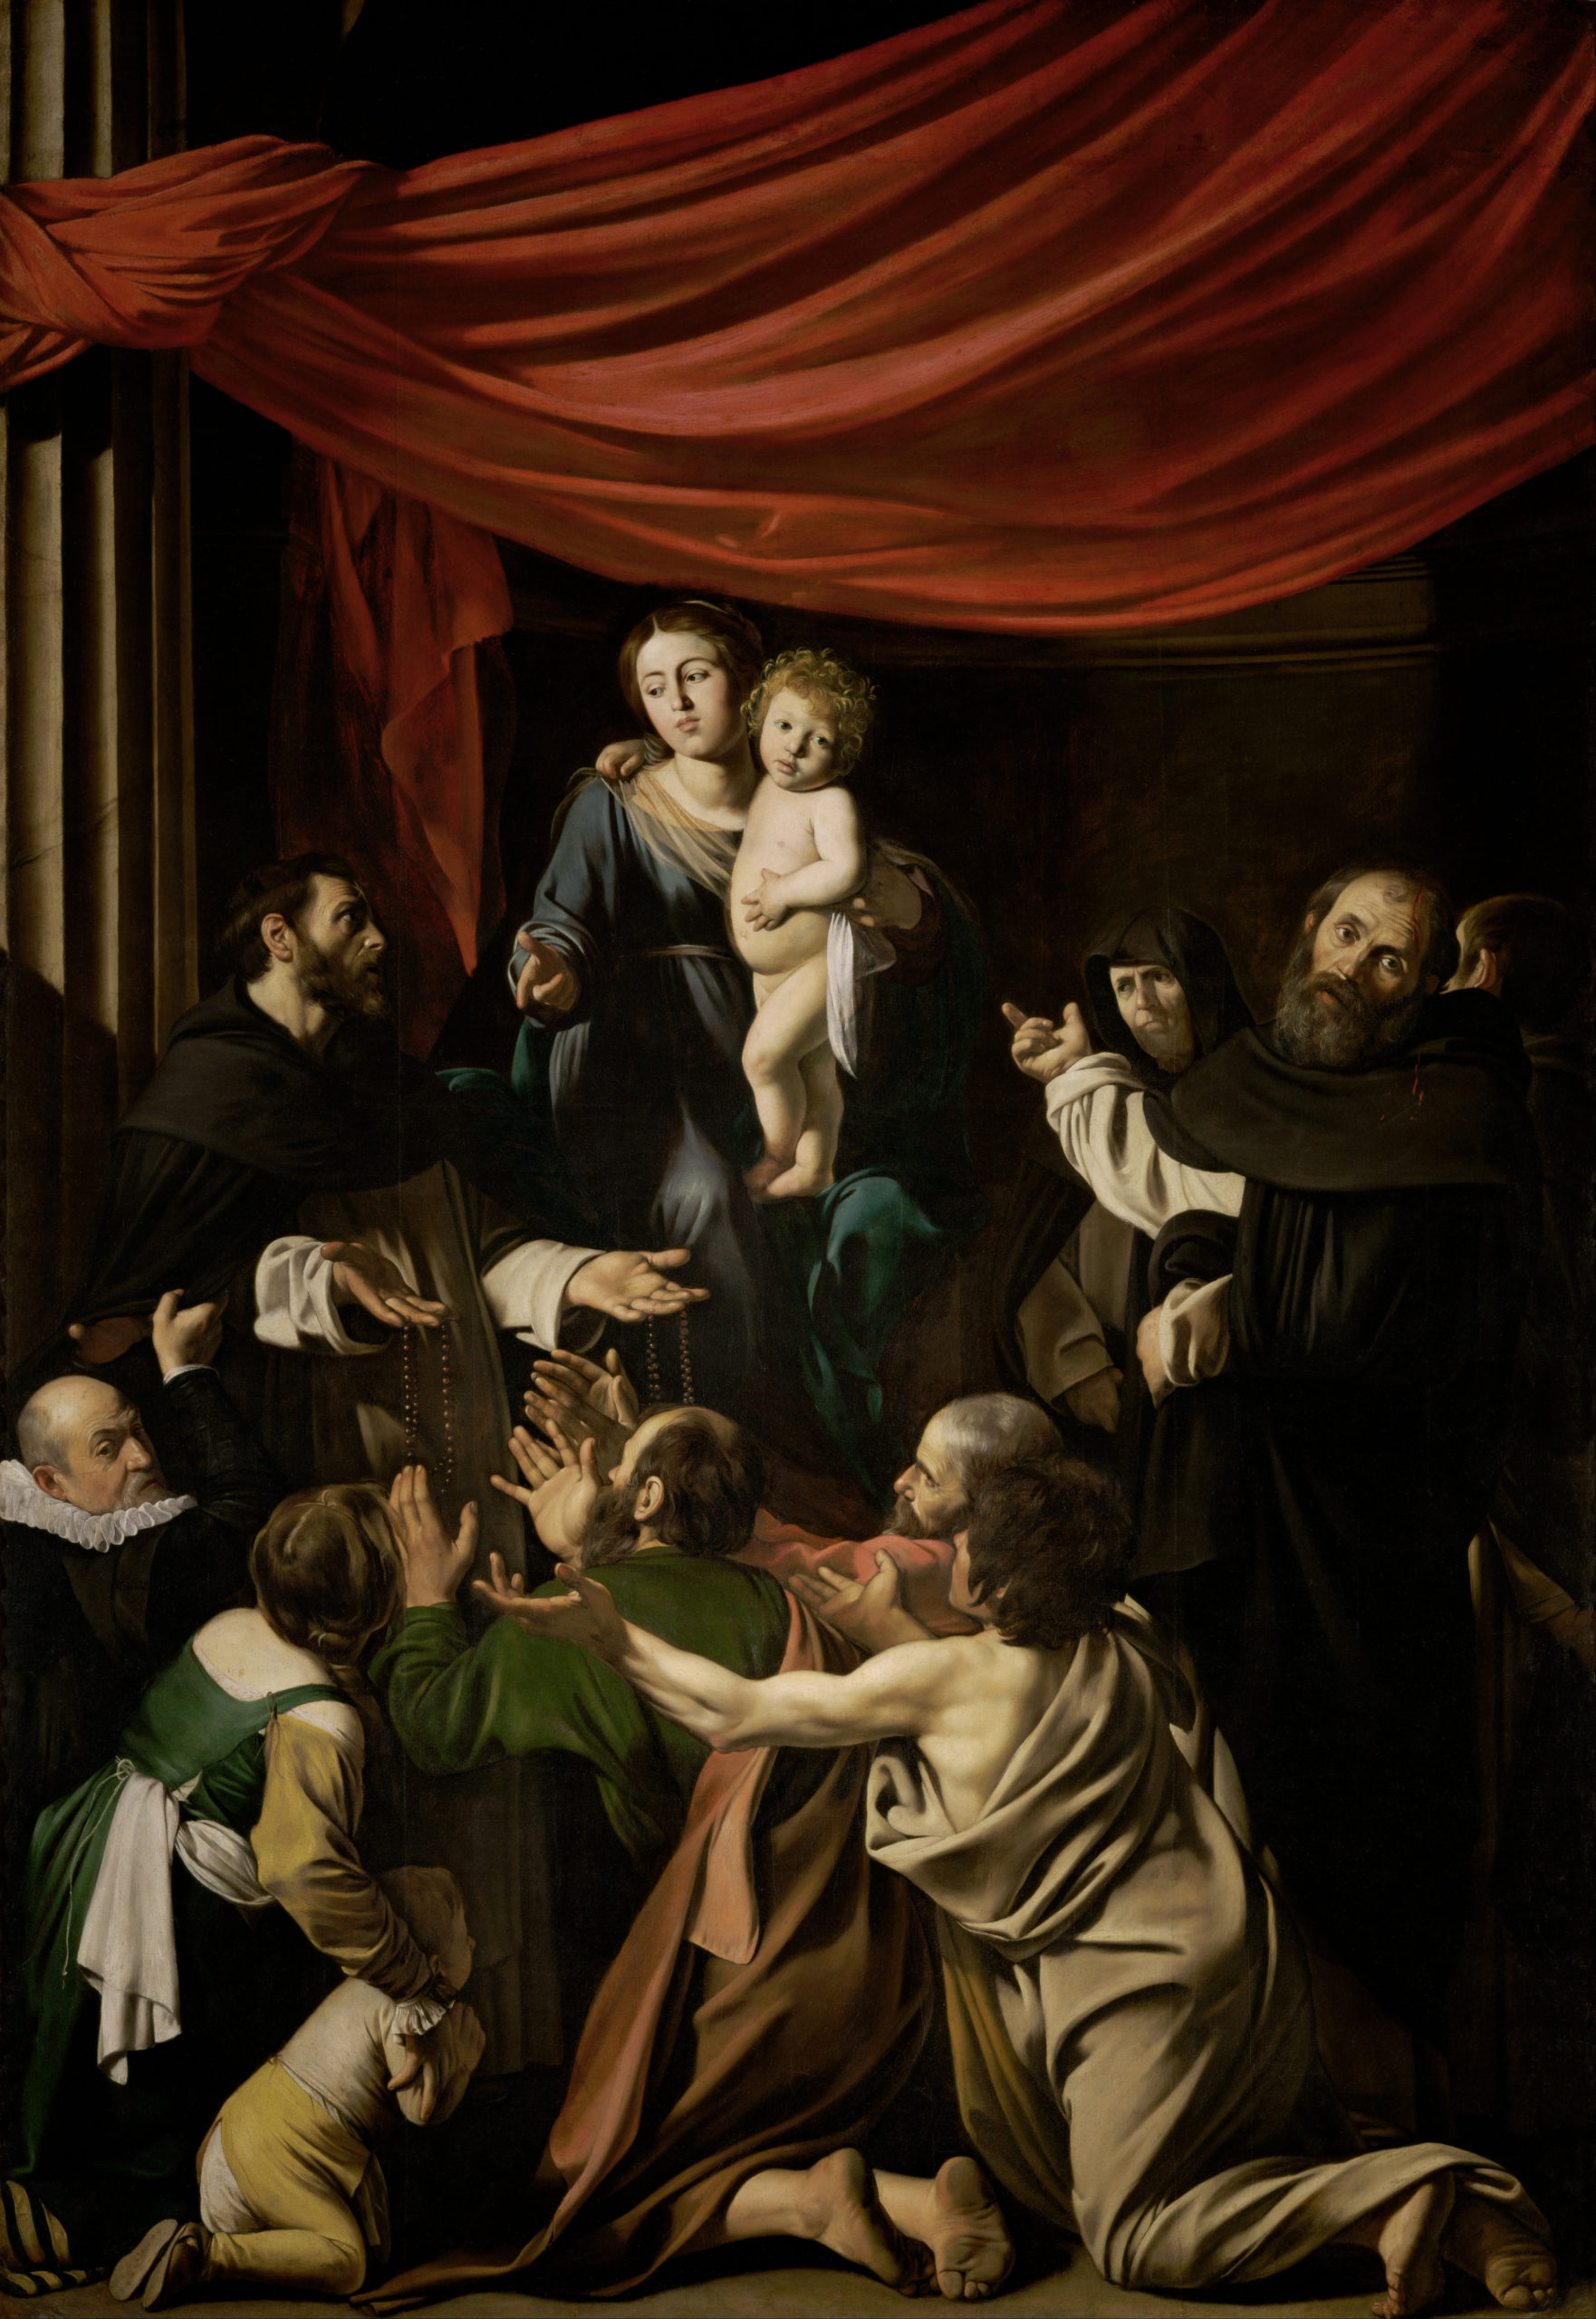 Caravaggio, Madonna of the Rosary, 1607, oil on canvas, 364.5 cm × 249.5 cm (Kunsthistorisches Museum, Vienna)